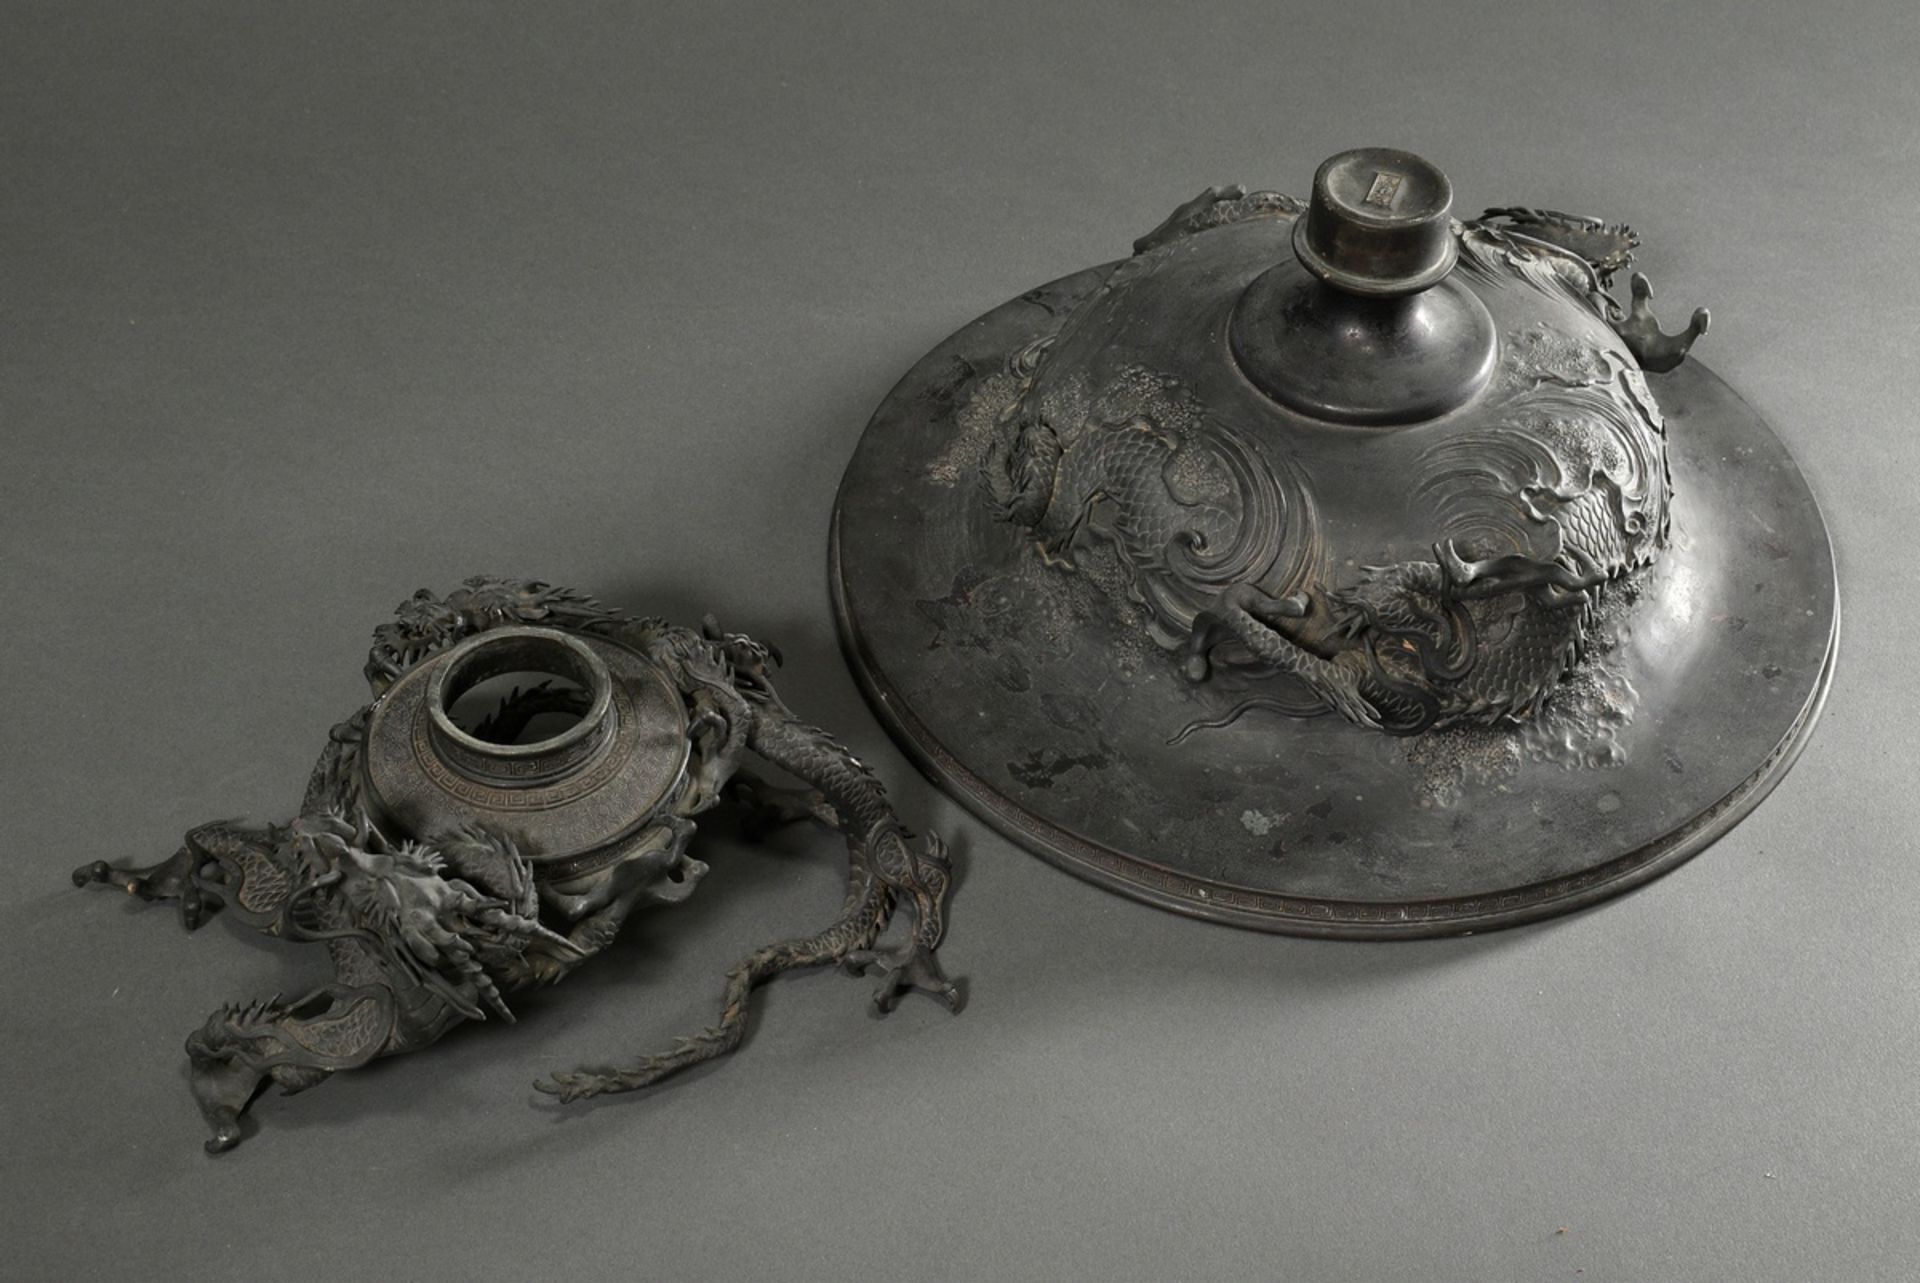 Three-part incense burner with sculpted dragon at the foot and on the wall, signed watakumo chûzo 渡 - Image 9 of 12